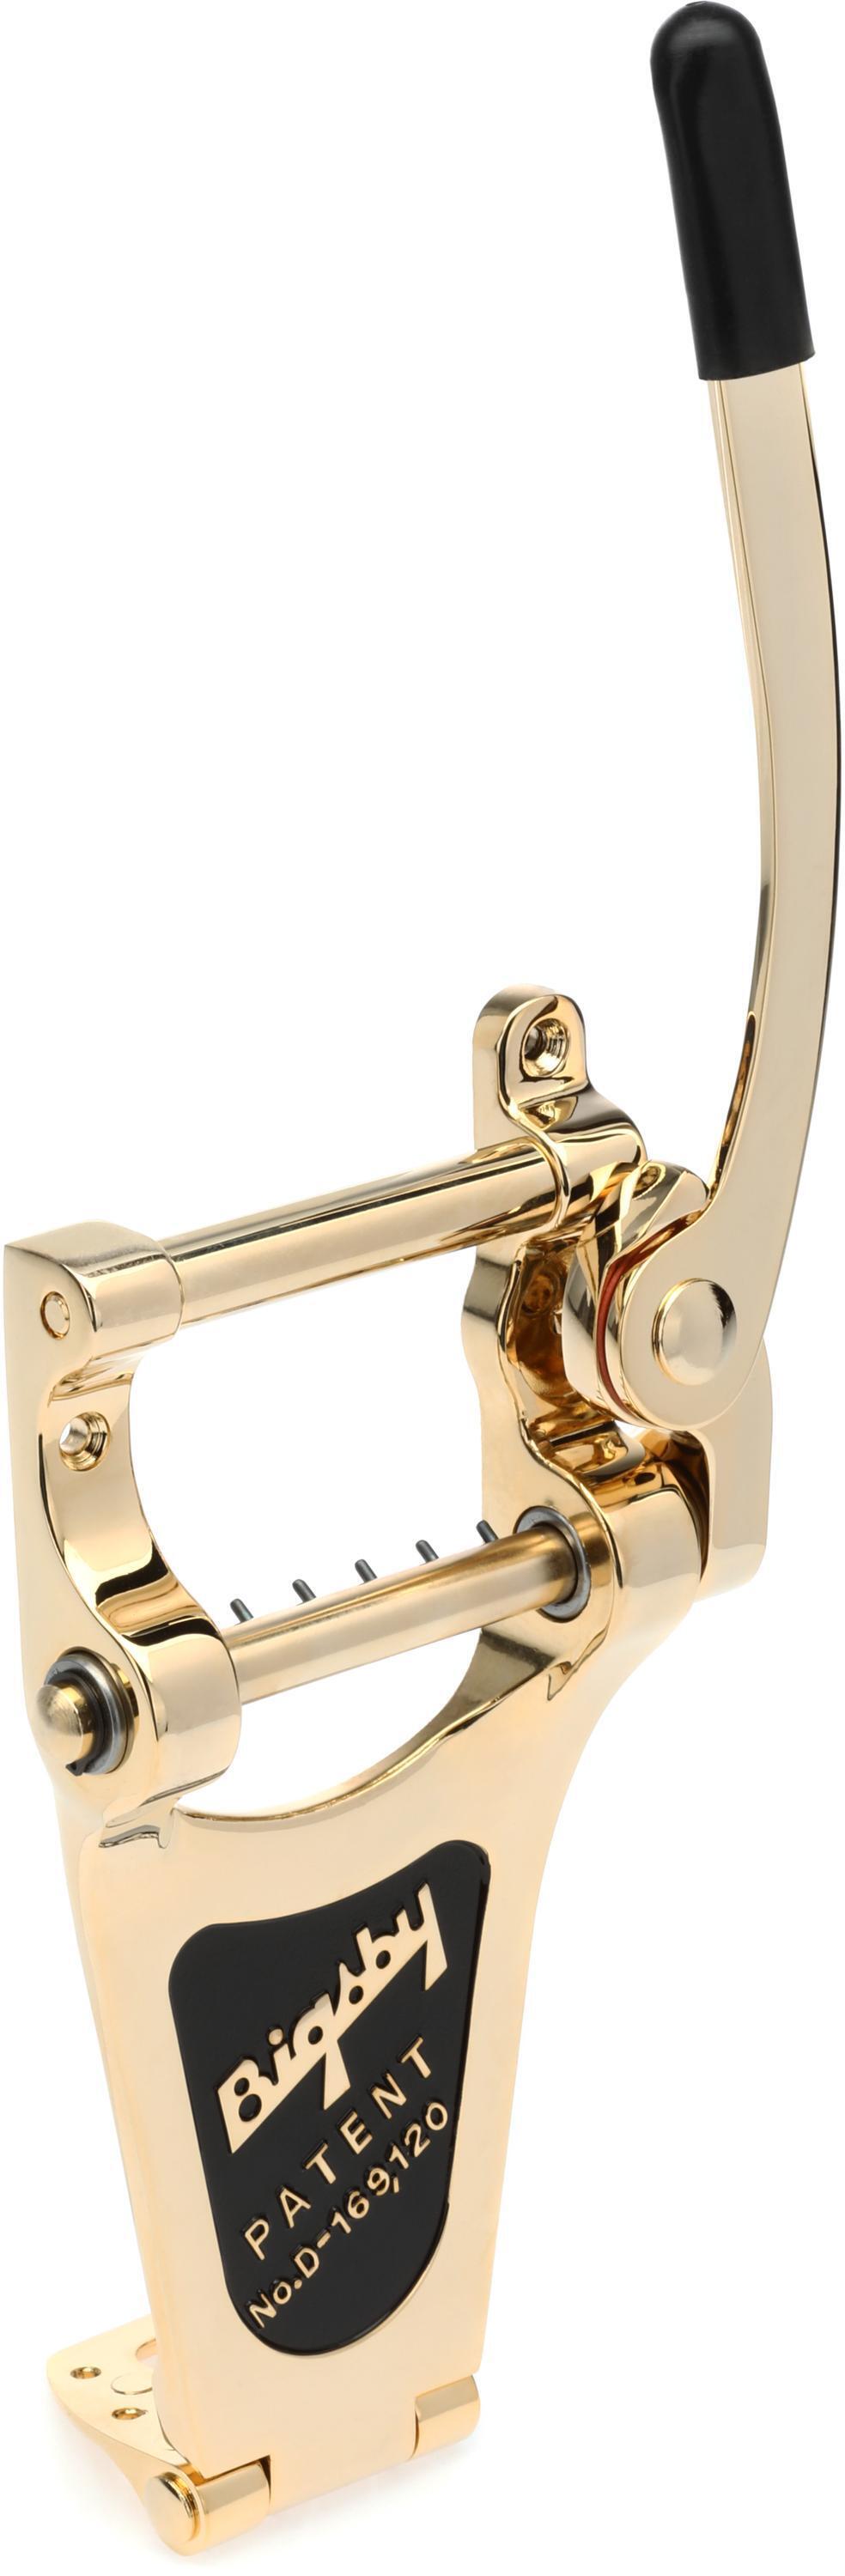 Bigsby Bigsby B7 Vibrato Tailpiece for Archtop Guitars - Gold